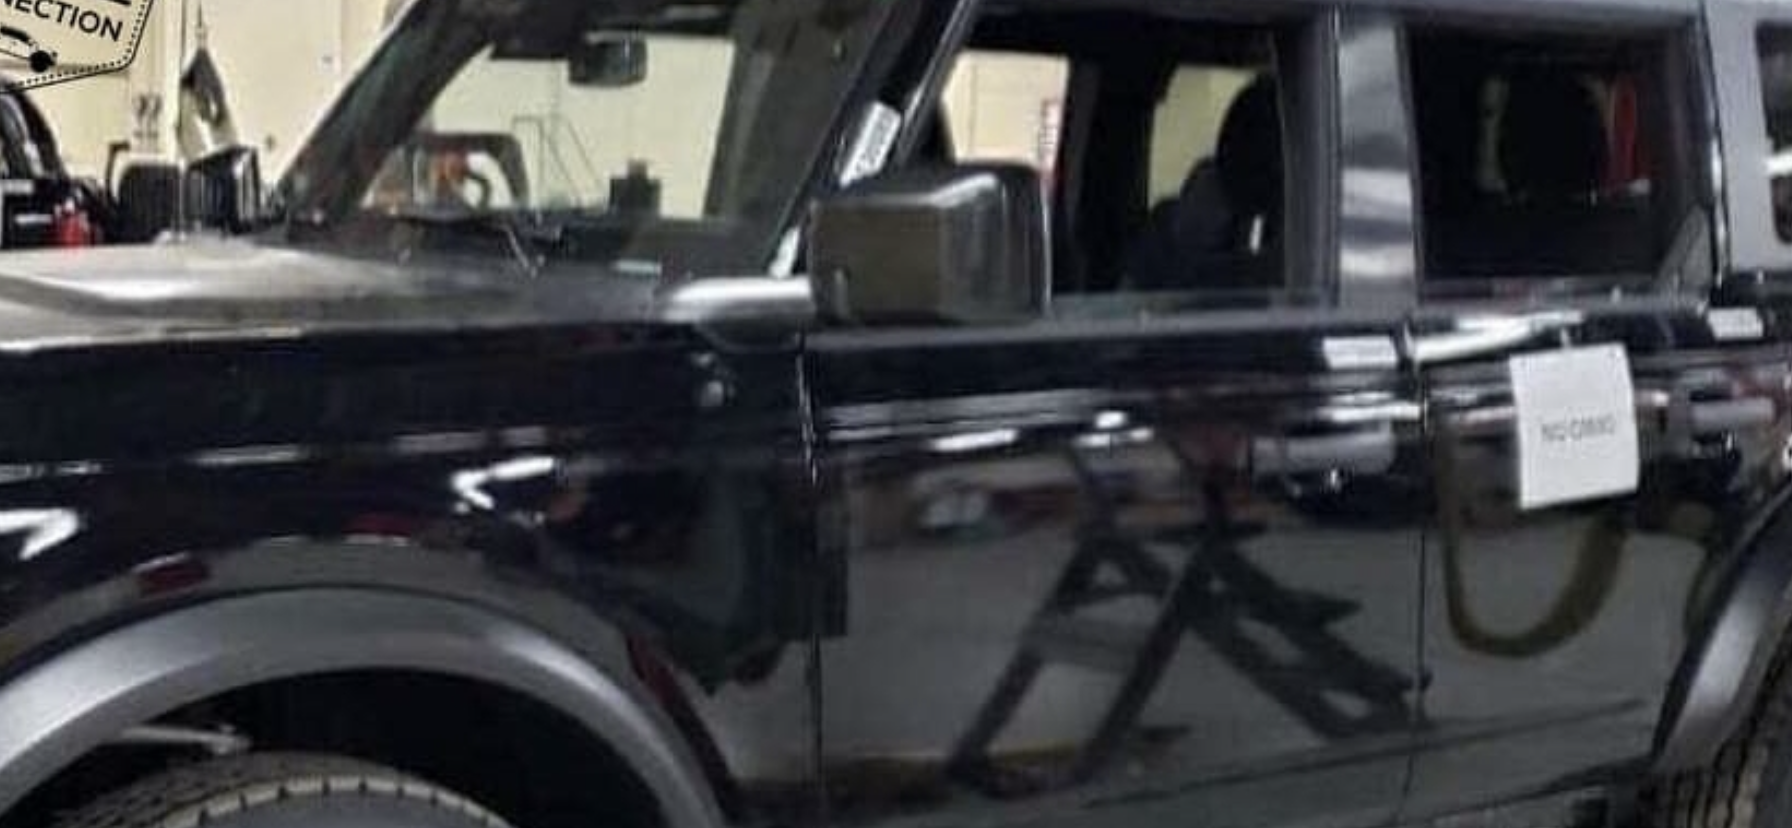 Ford Bronco Best Uncovered Looks Yet! Black 4 Door Bronco + 2 Door Without Top 61EE2015-E966-46EC-A465-01A73E8277B9